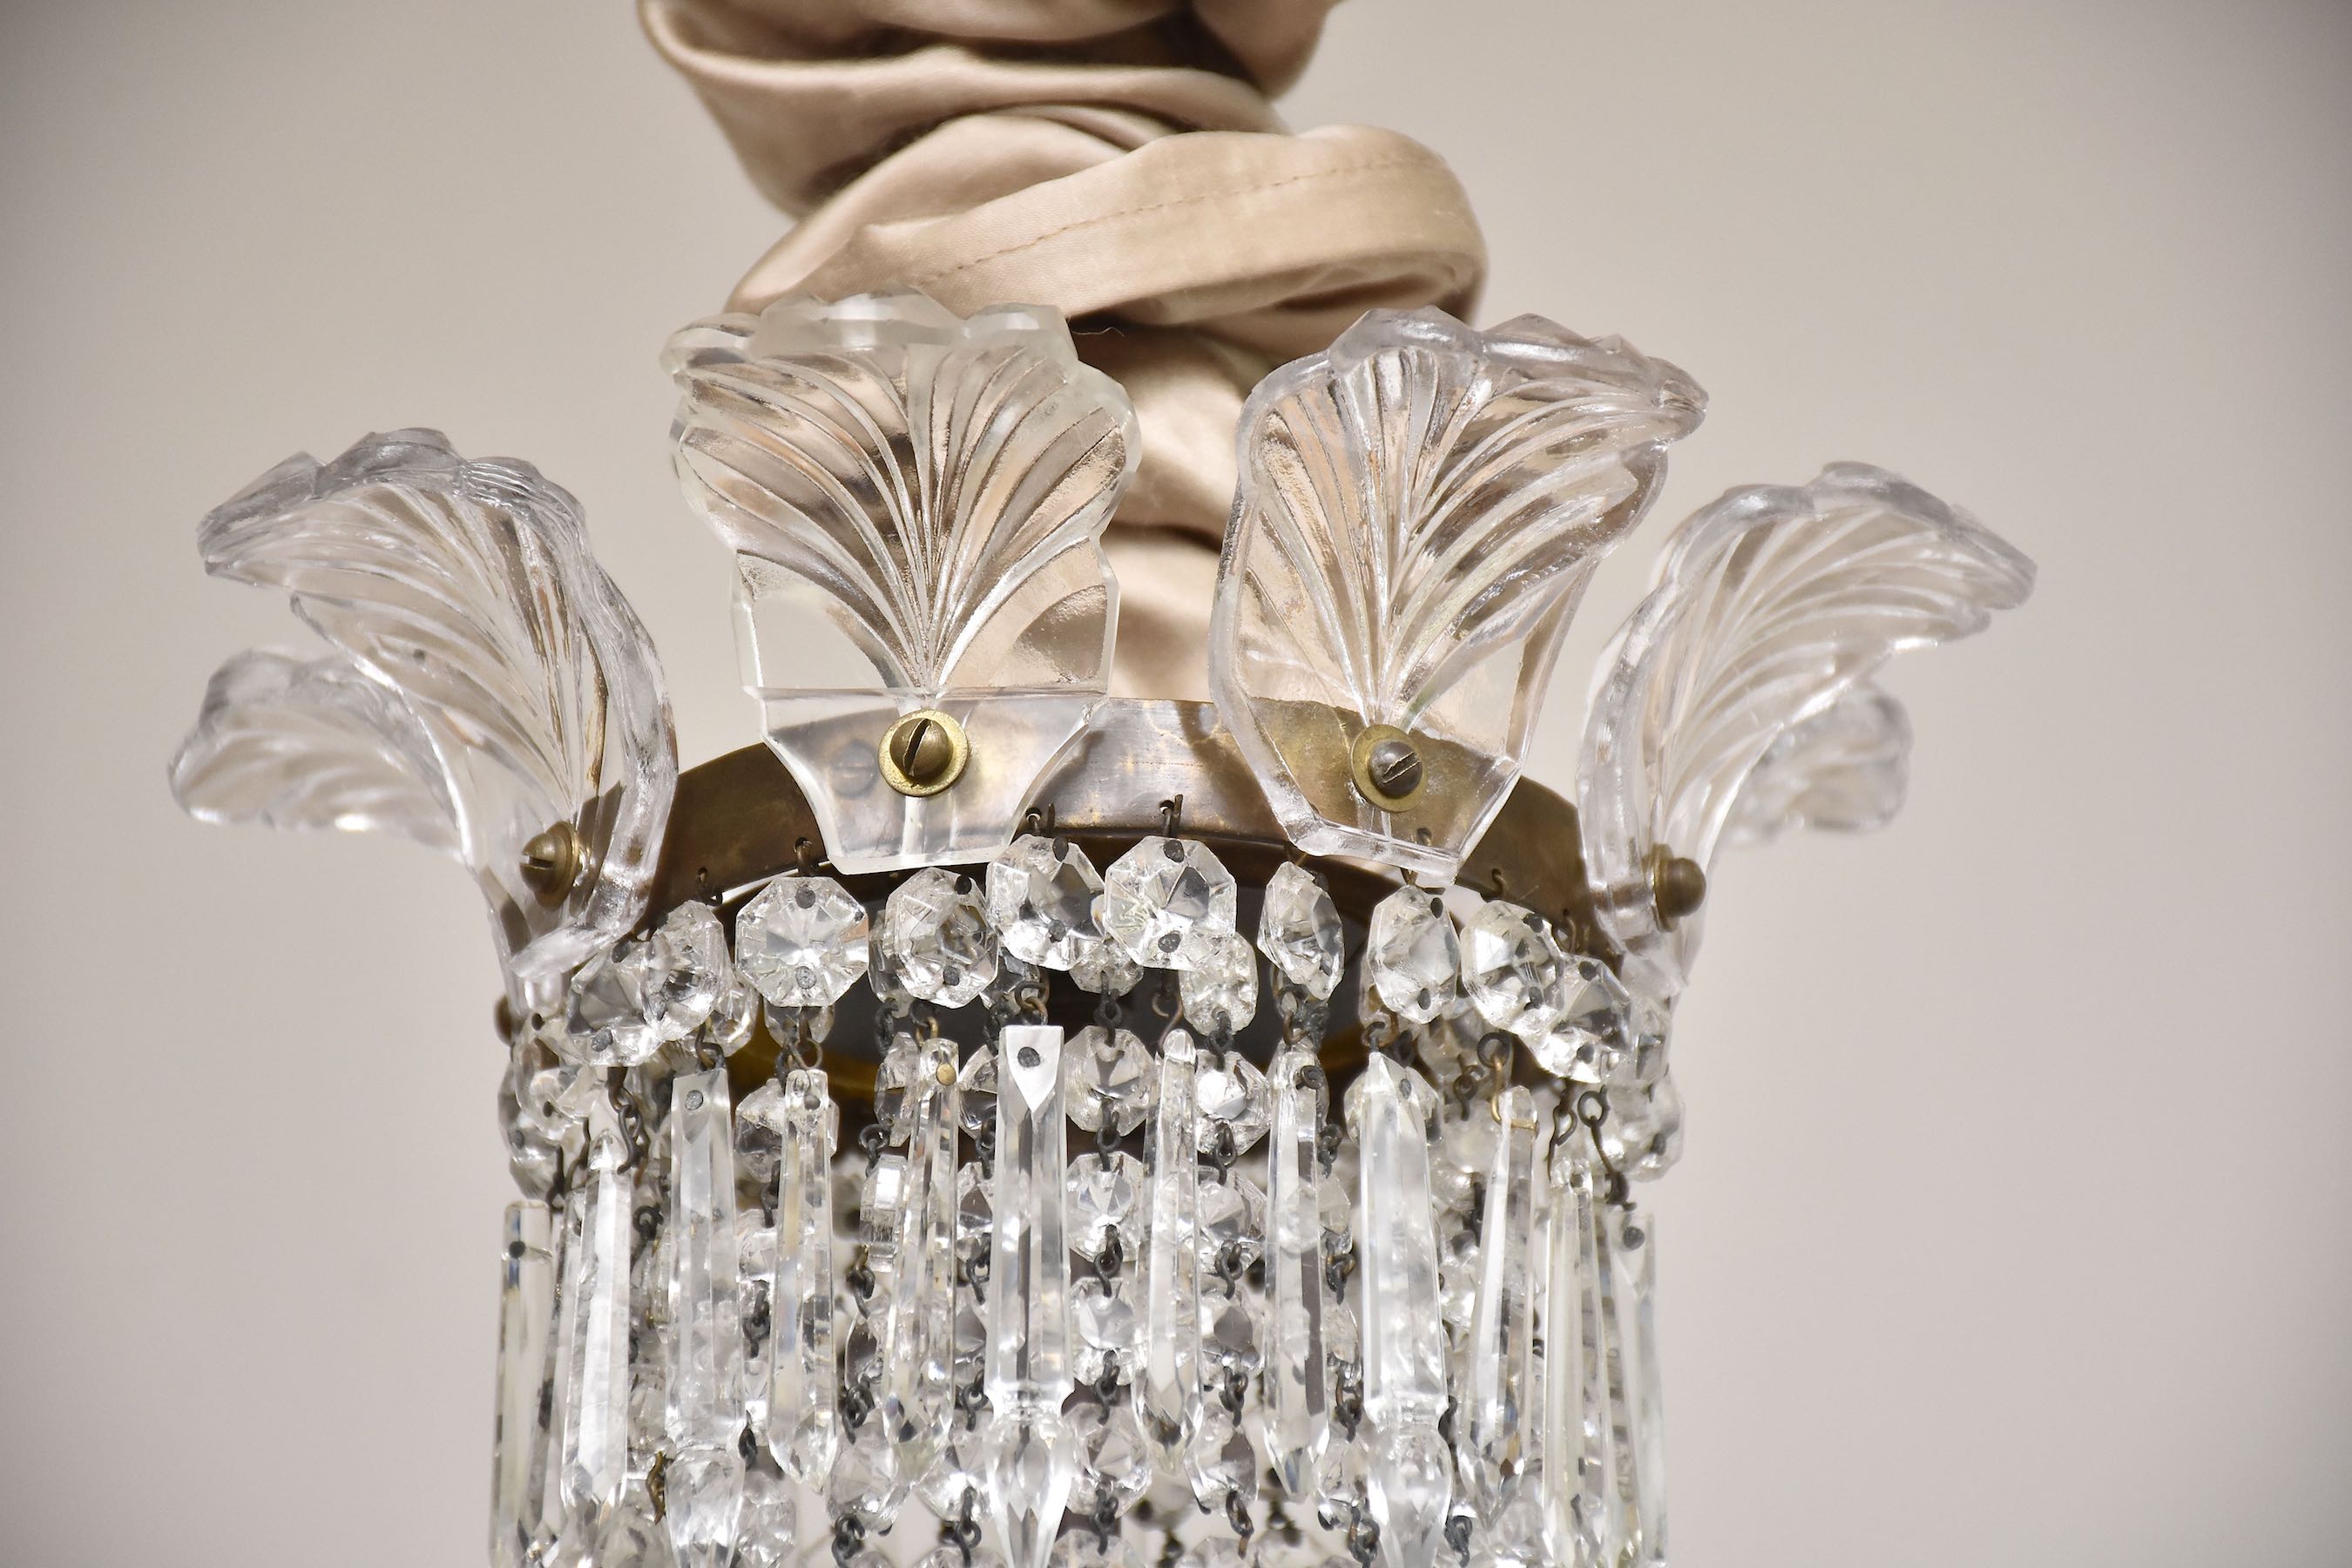 Crystal chandelier in the style of Louis XVI